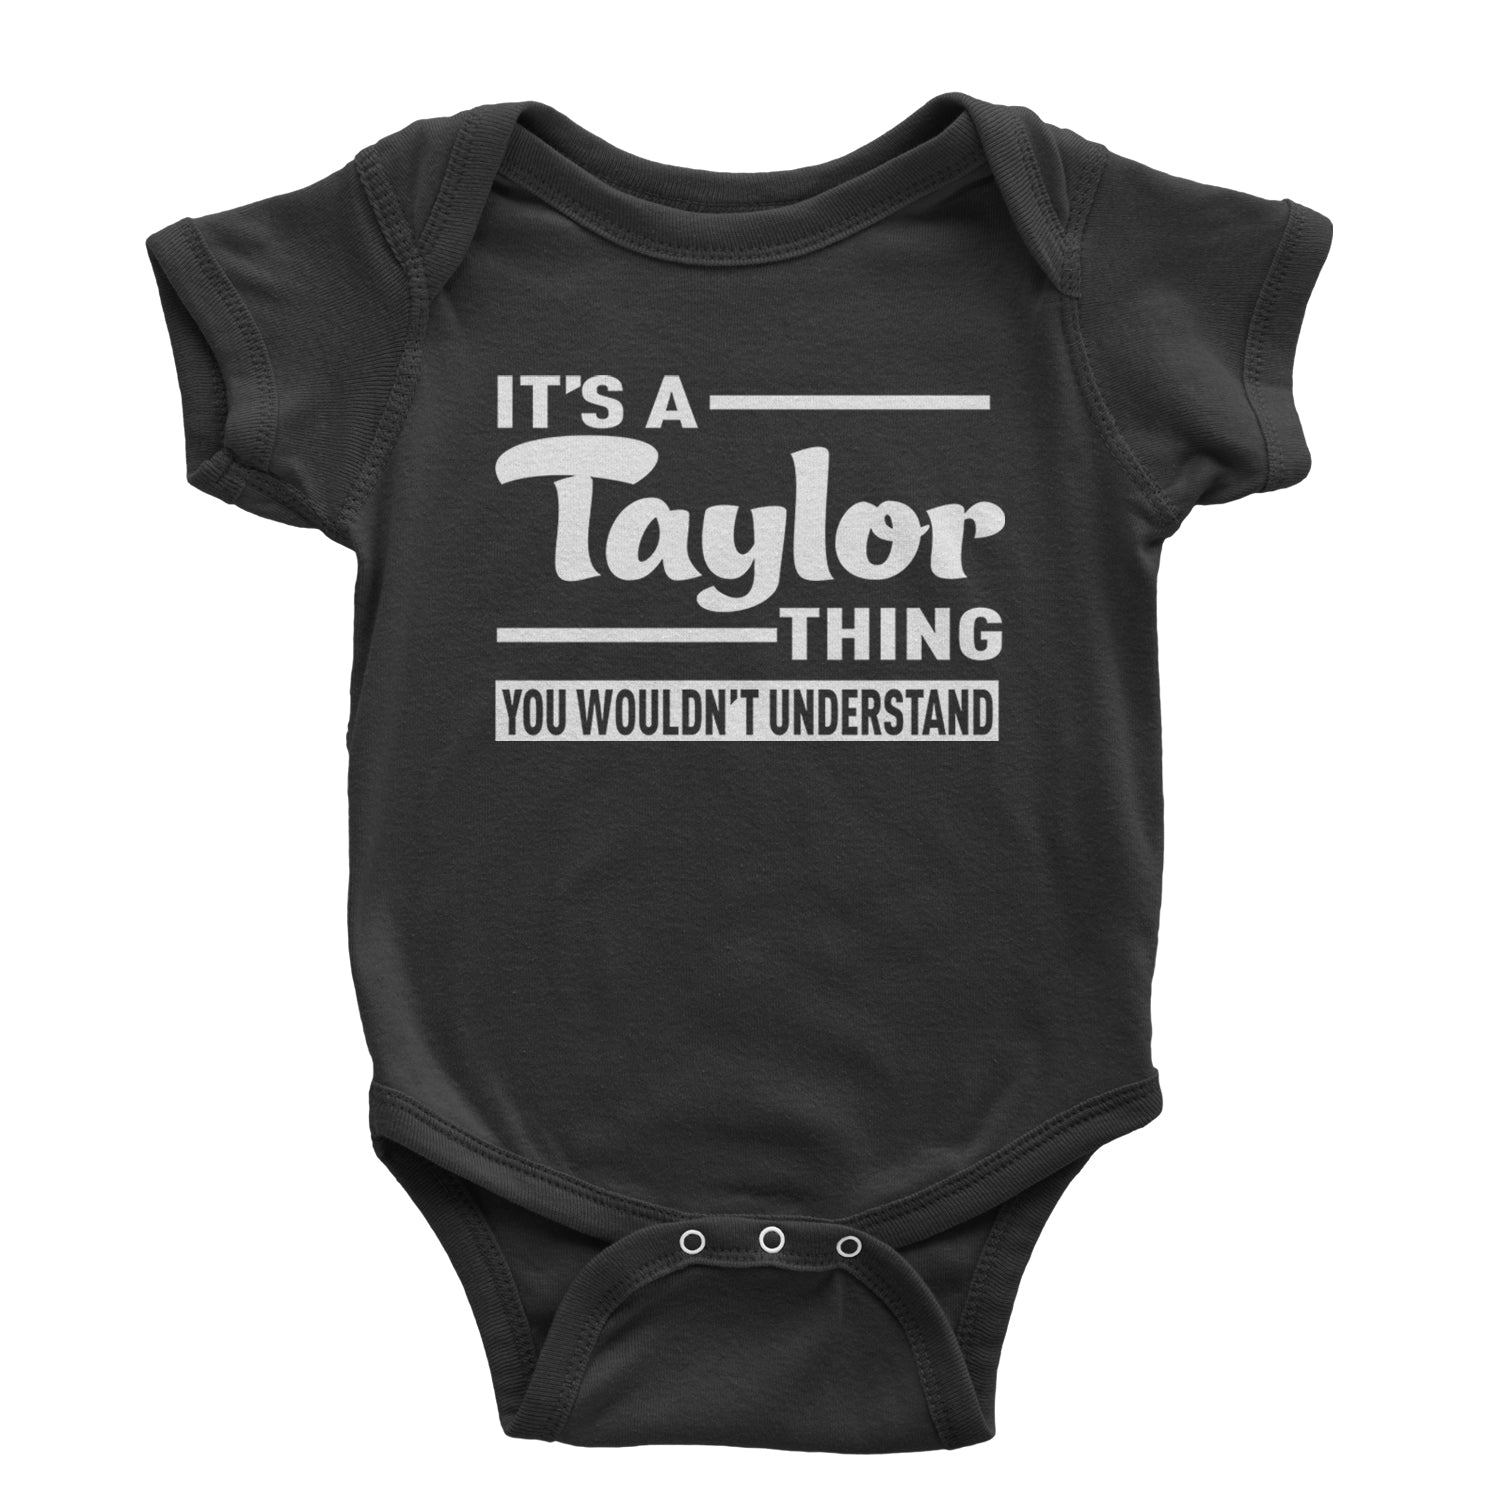 It's A Taylor Thing, You Wouldn't Understand TTPD Infant One-Piece Romper Bodysuit and Toddler T-shirt